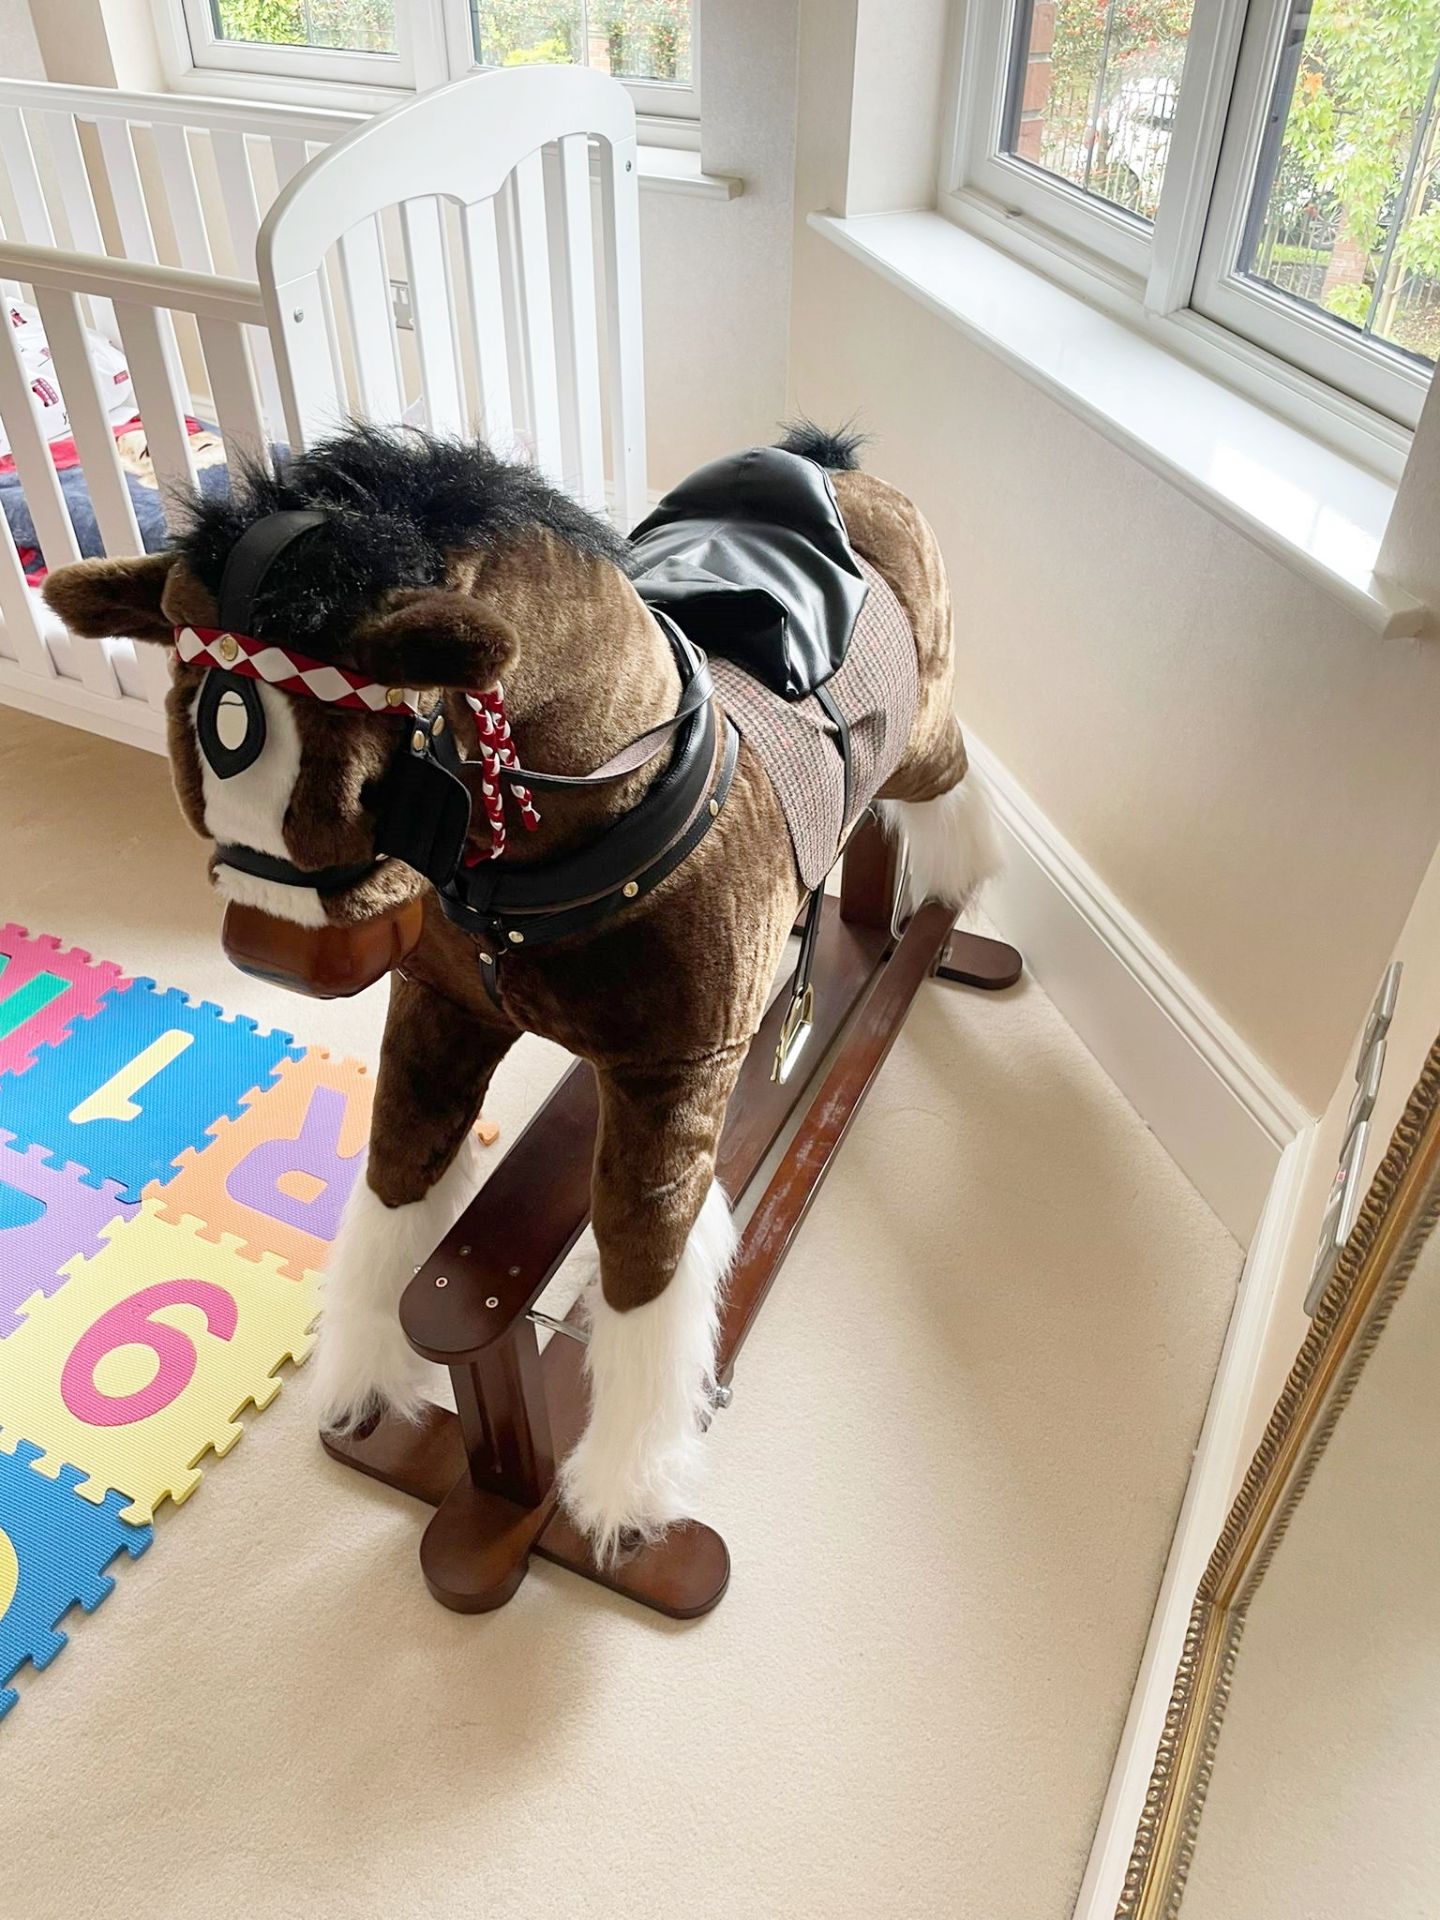 1 x Mamas And Papas Rocking Horse To Be Removed From An Exclusive Property In Wilmslow  - CL693 - NO - Image 3 of 8